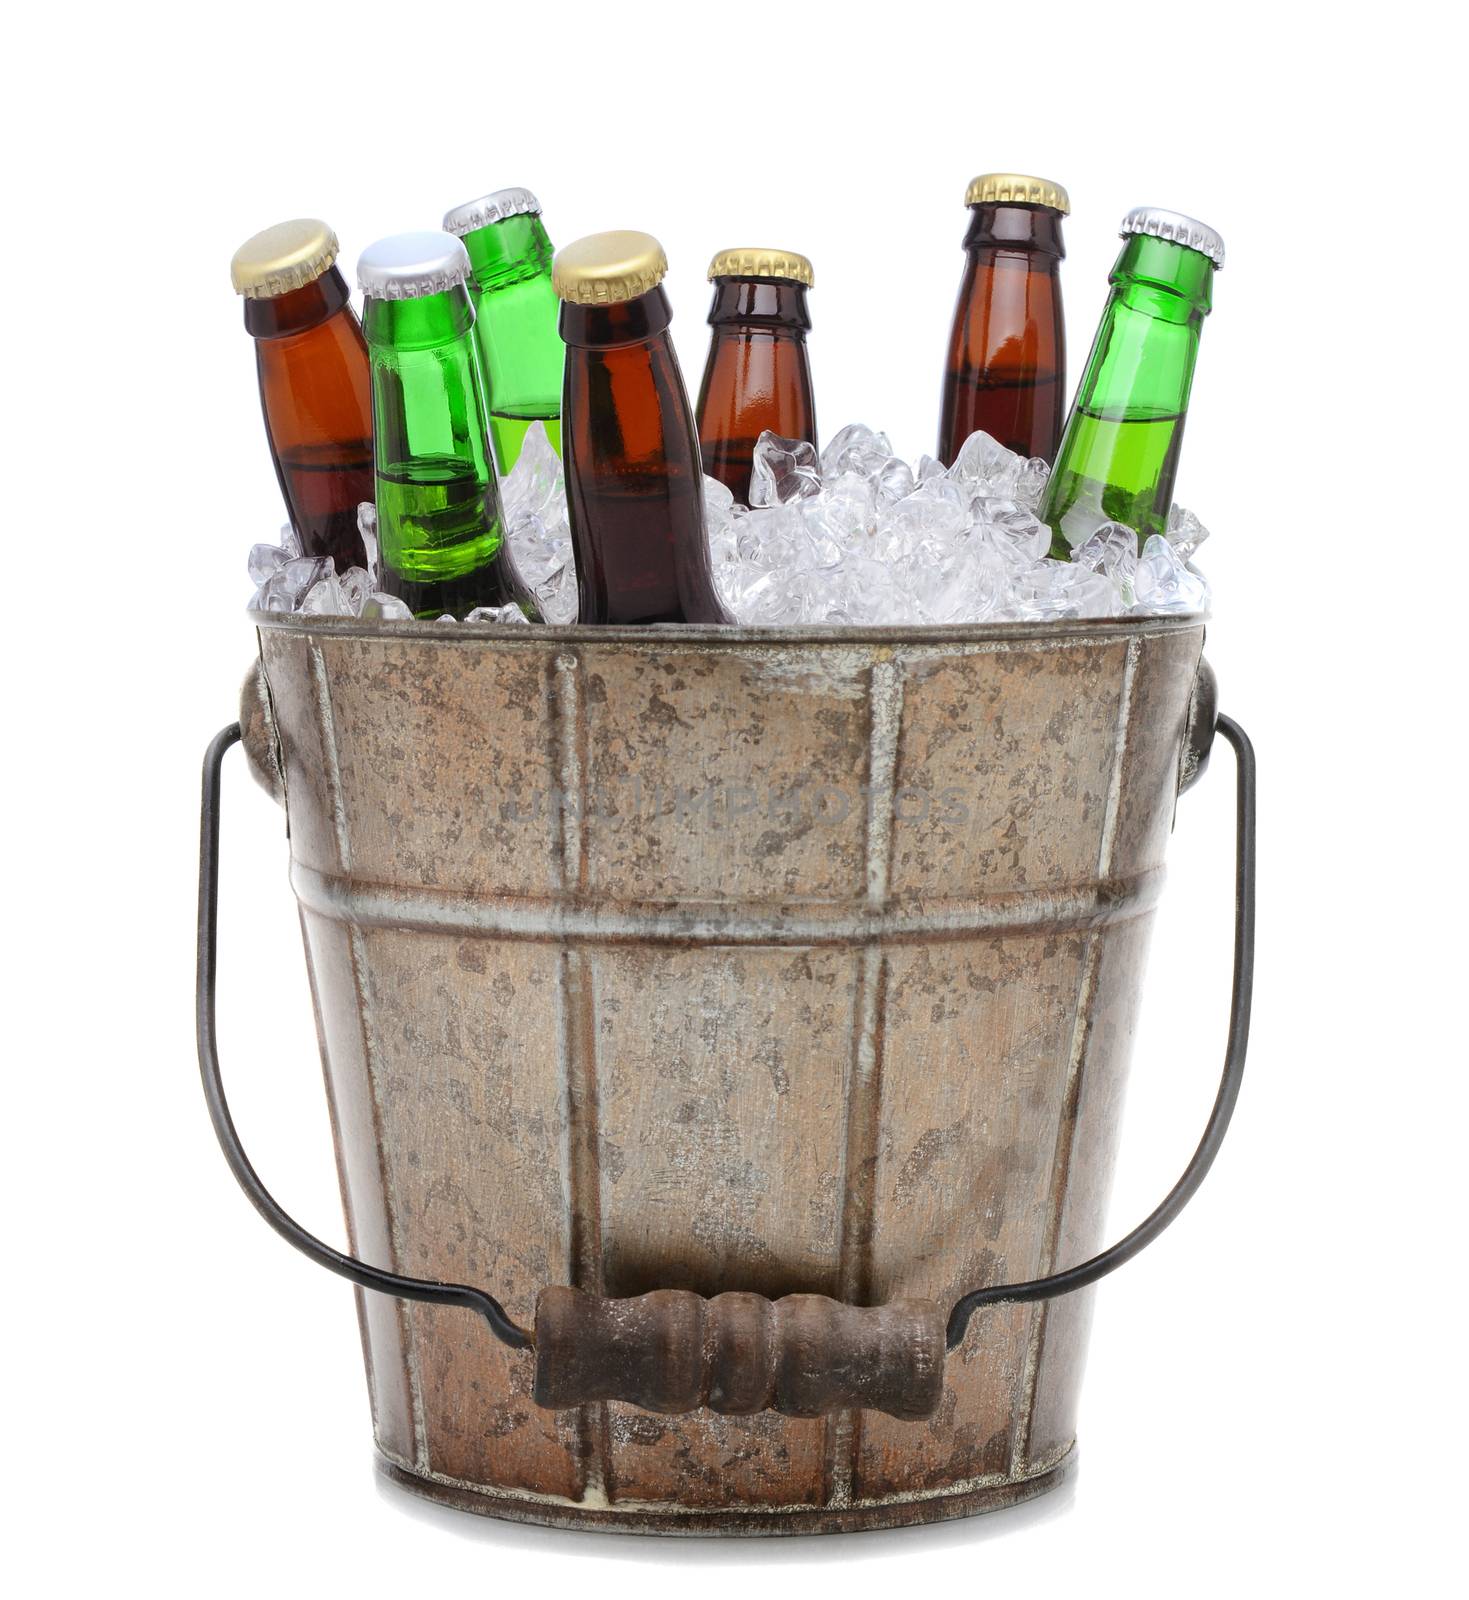 Beer Bottles in an old fashioned ice bucket.